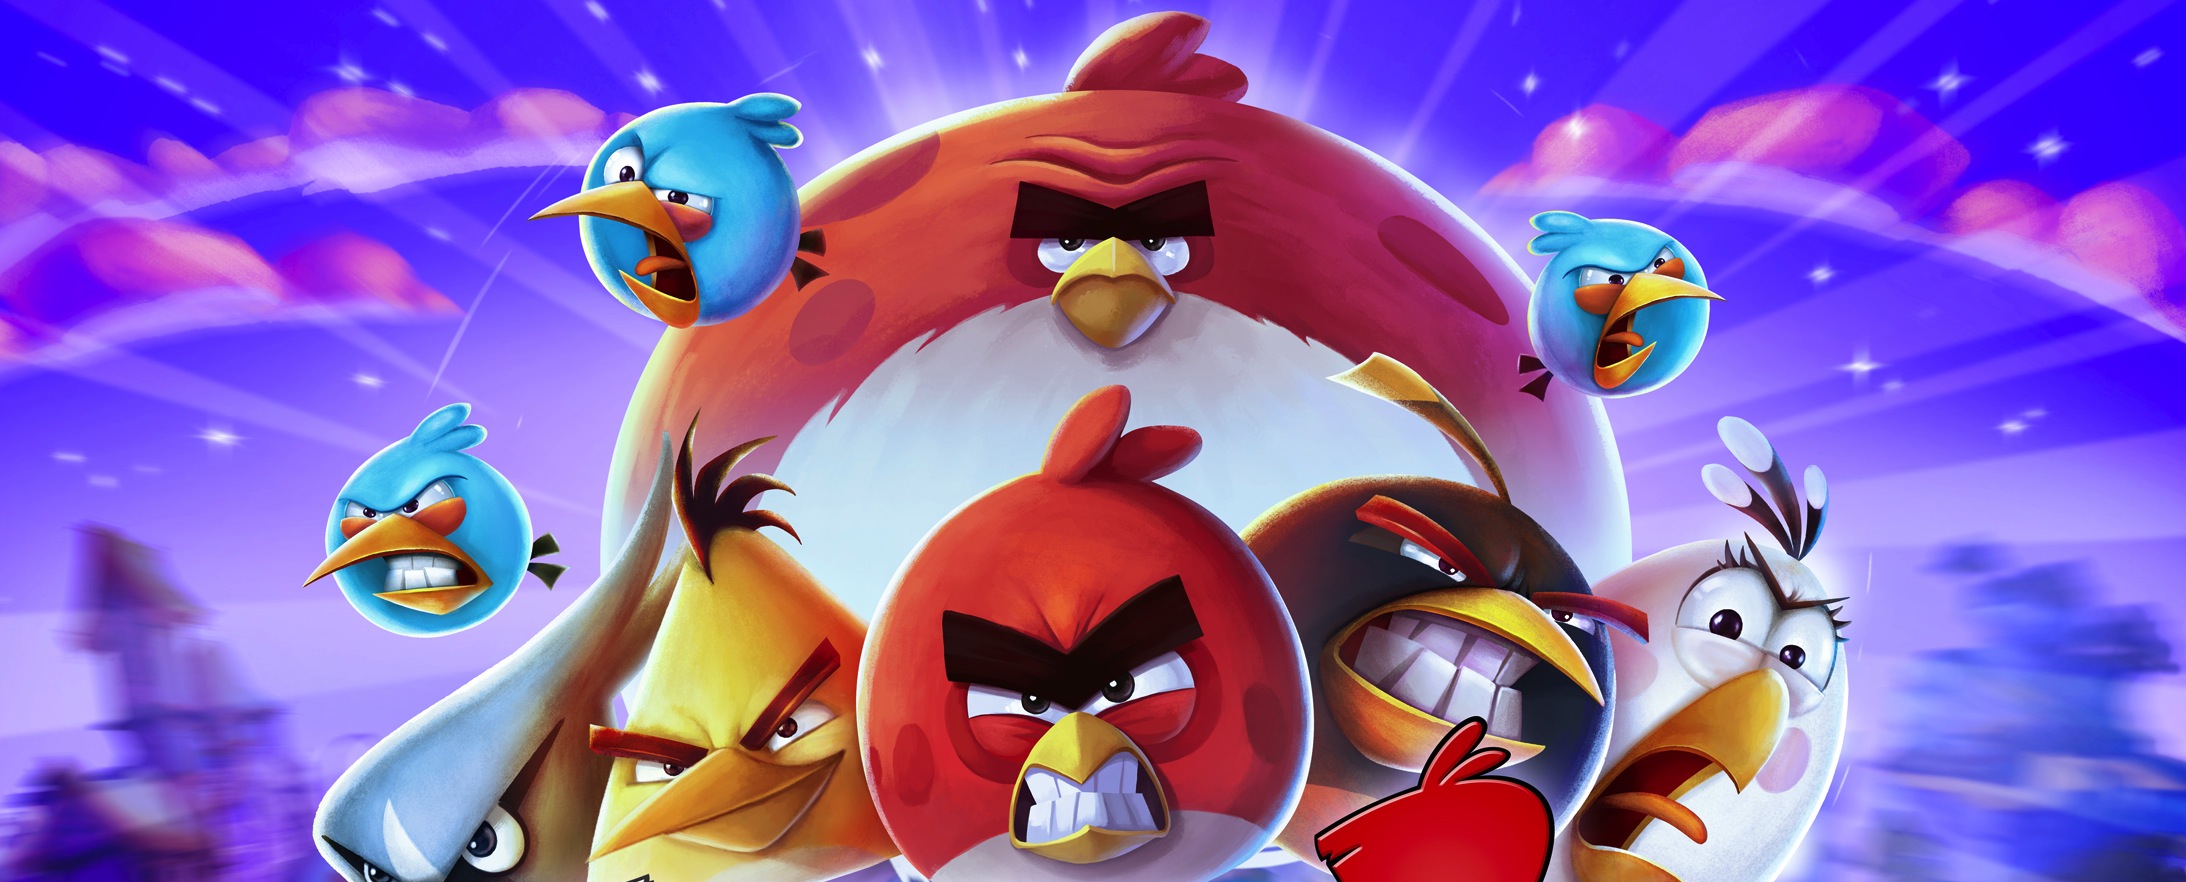 Angry Birds 2 Adds Bosses and Ditches Premium Model - GameSpot